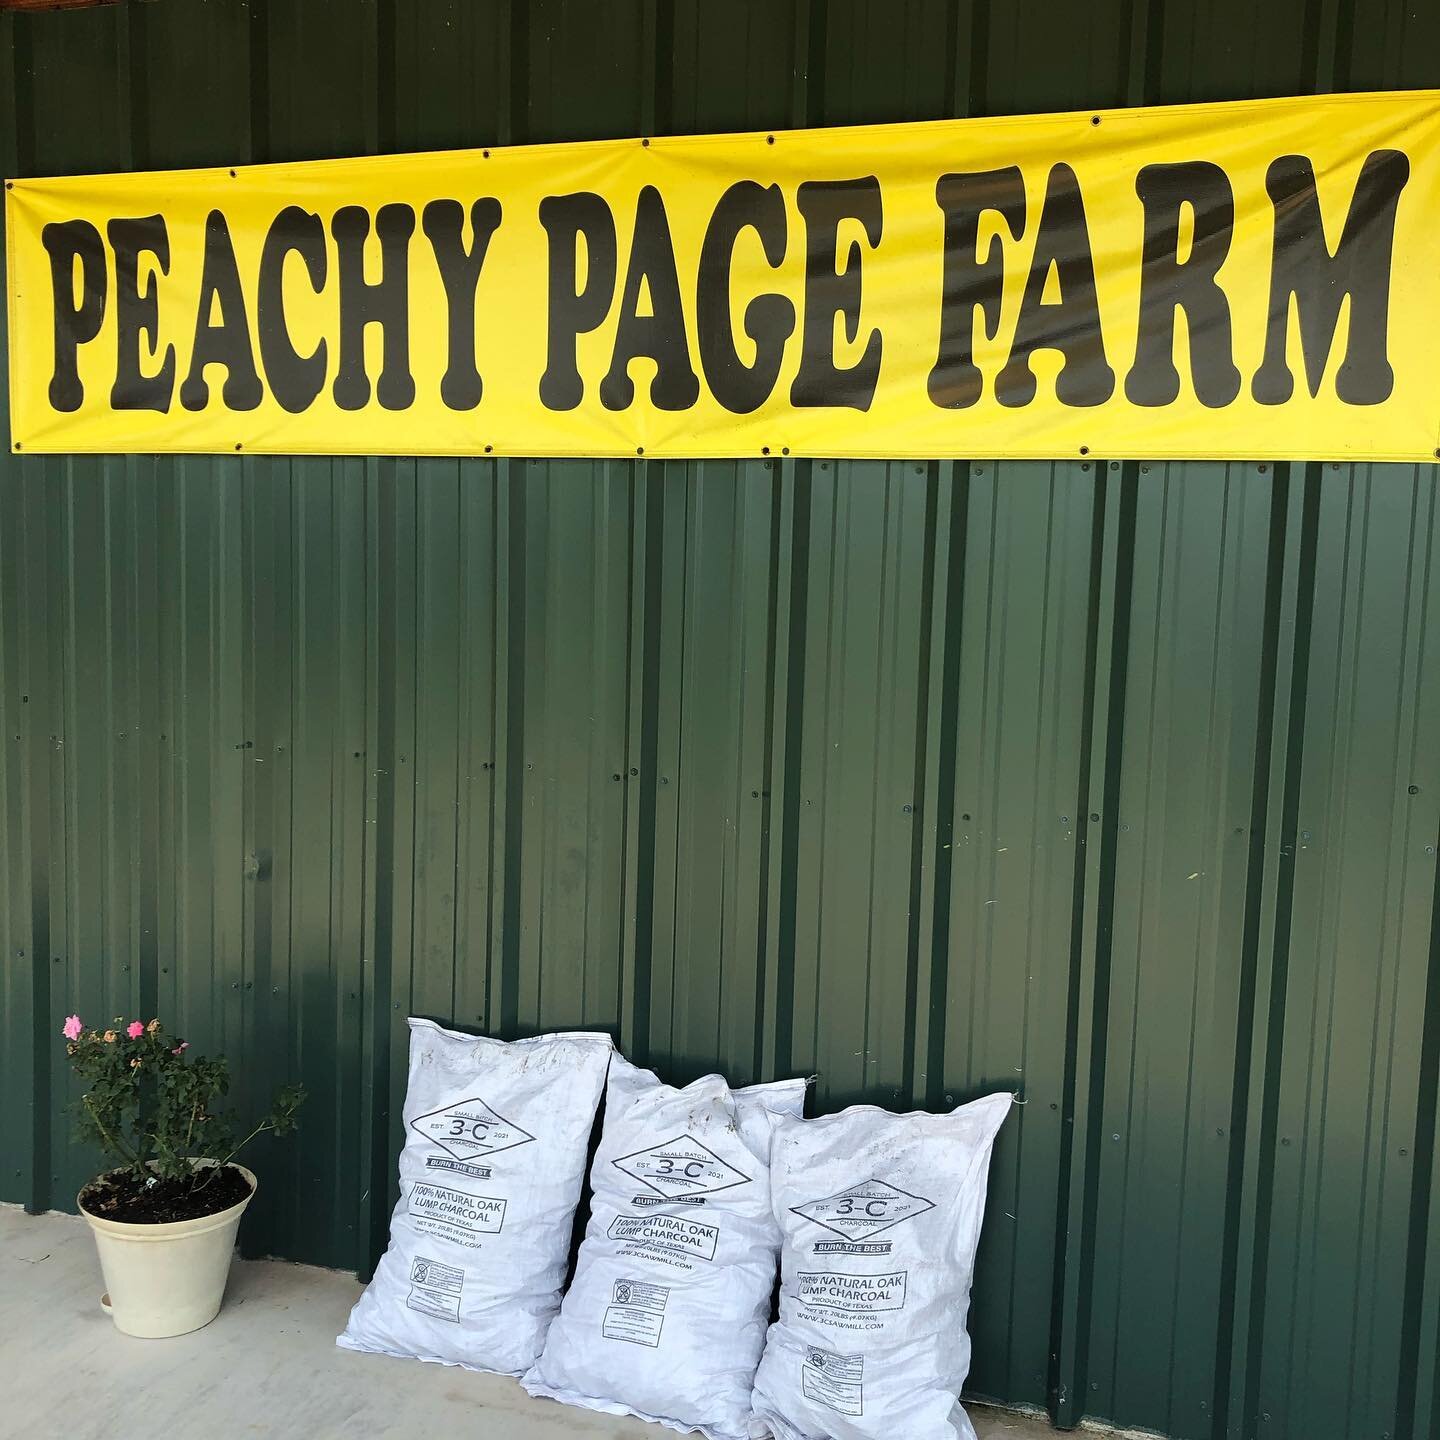 Another day, another opportunity to make something happen. Thank you Peachy Page Farm for allowing us the opportunity to work with you. Go see them for all you summertime needs.